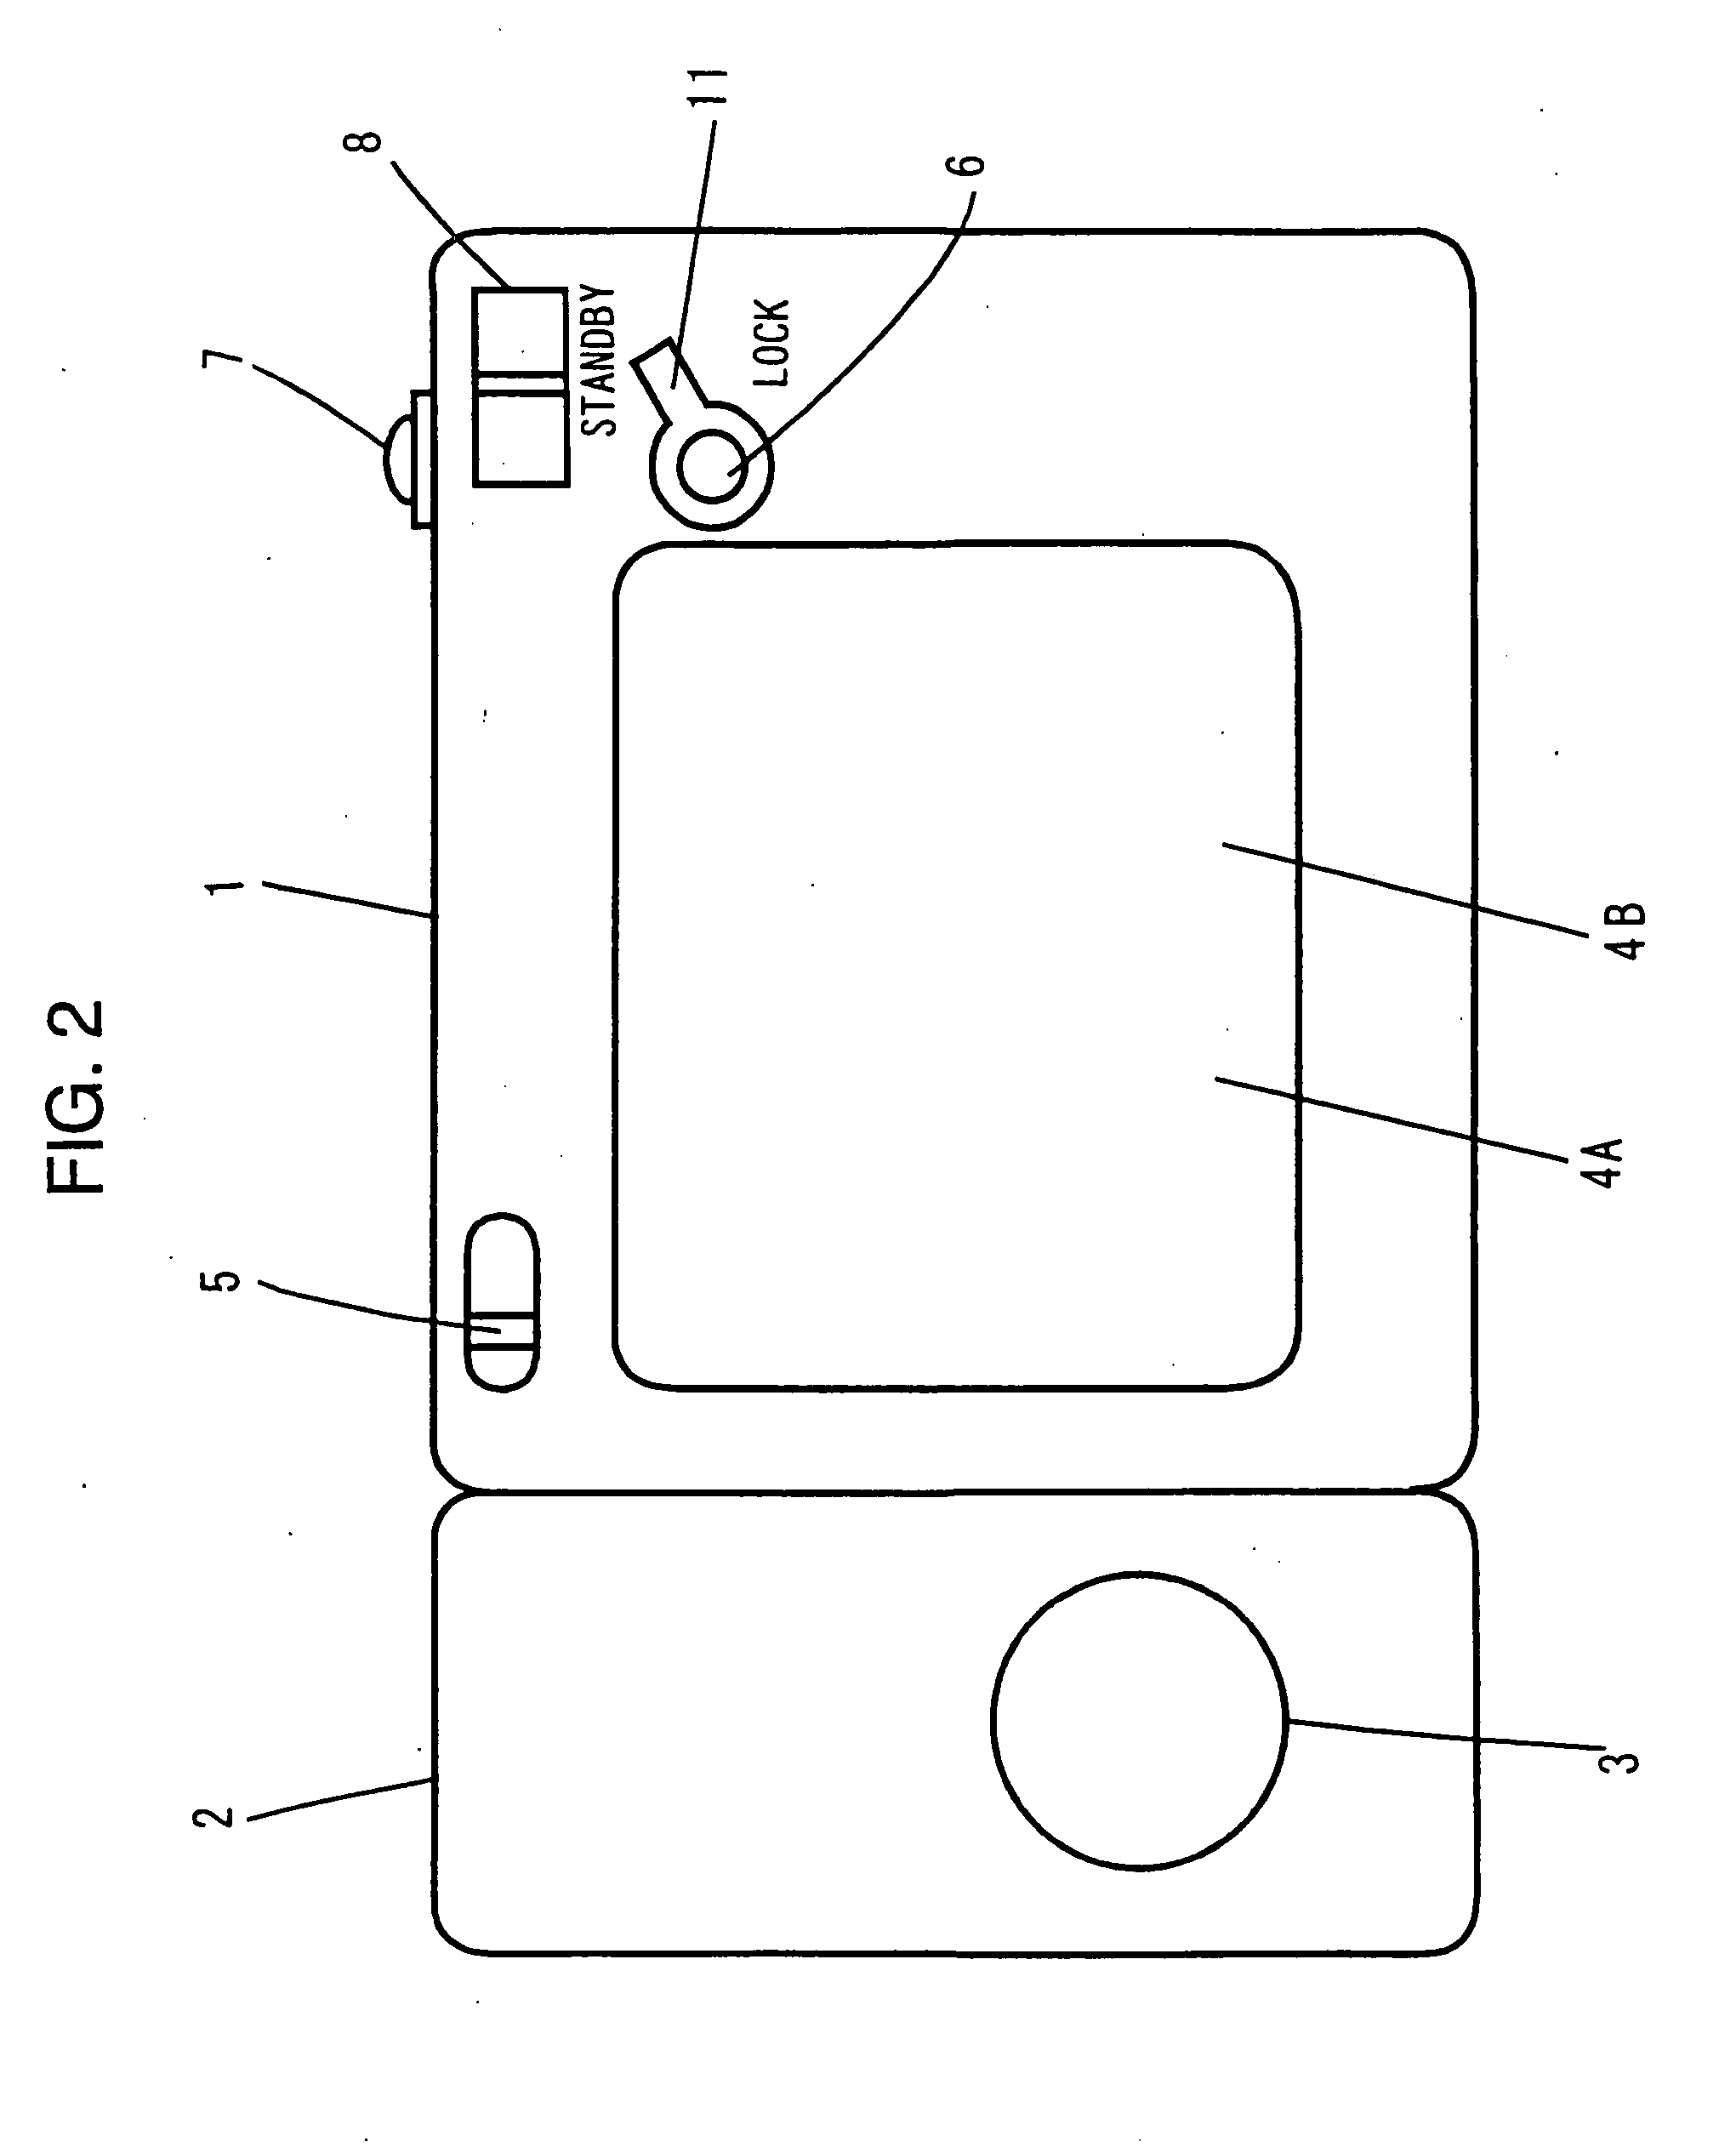 Image signal recording/reproduction apparatus, method employed therein, and image signal recording apparatus